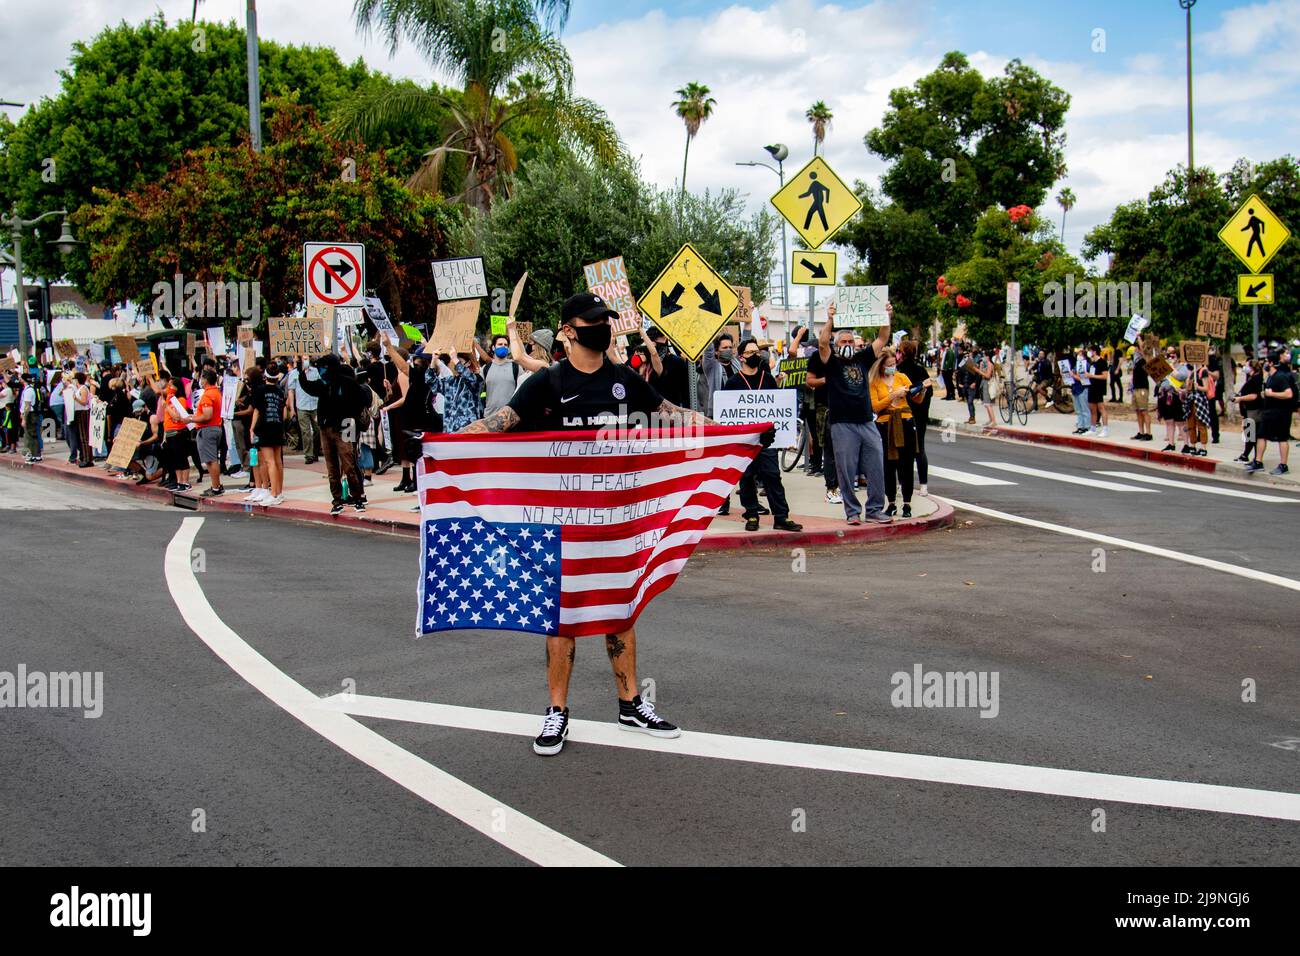 March through the streets of Los Angeles, CA for Human Rights Equality and Black Lives Matter protest. Stock Photo